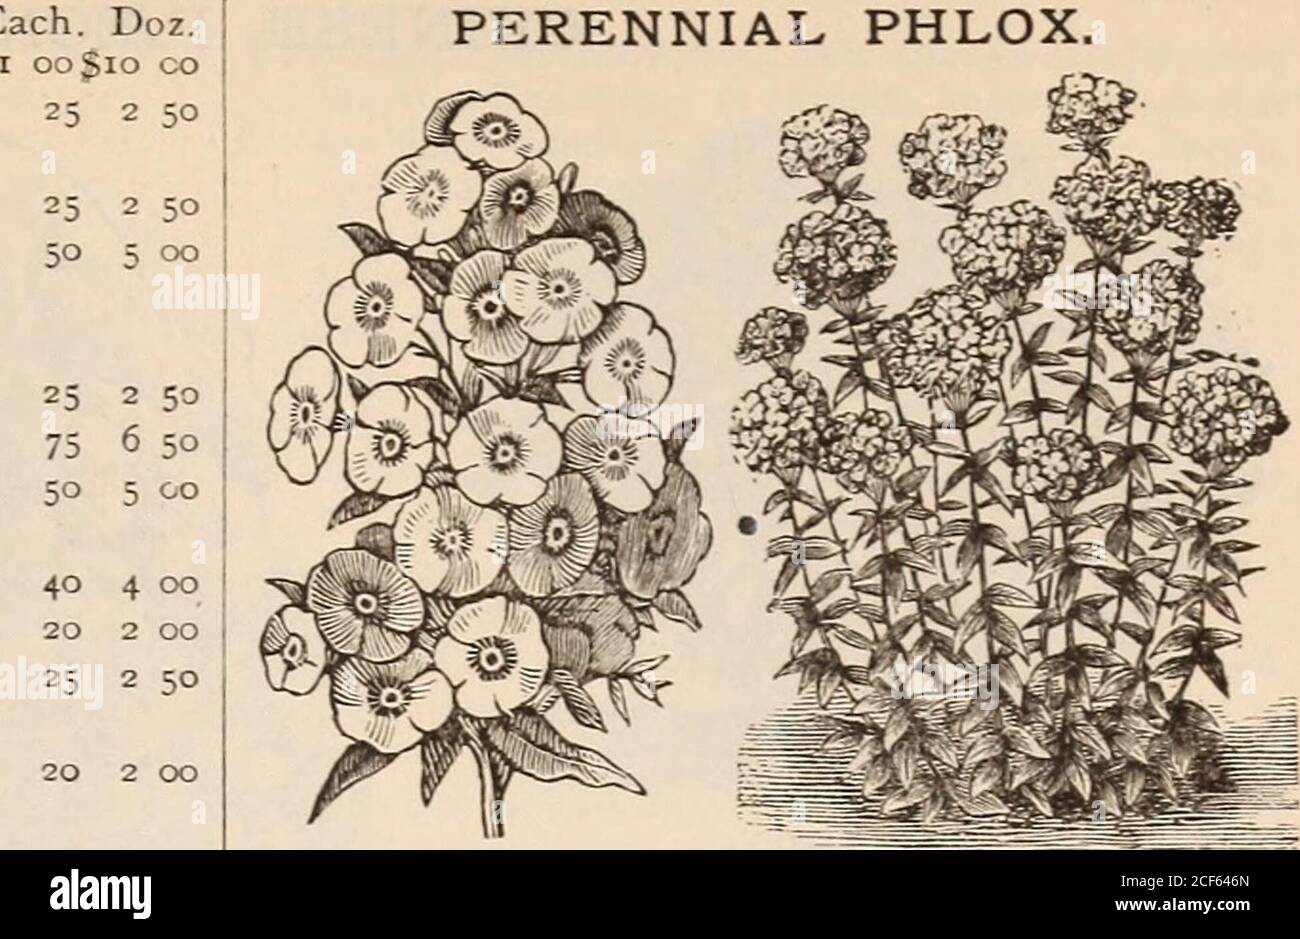 . Vick's floral guide. ther in the spring or autumn. Lily of the Valley, very sweet and graceful; deli-cately hung; per dozen, 50 MULBERRY. The leaves of the Mulberry are used as food for thesilkworm, and the fruit is good. The Russian varietyis a strong, rapid grower, and considered by many avaluable timber tree for the west. Russian Mulberry, dozen, $2.00 ; each, .... 20White, (Morus alba, dozen, $2.00; each . 20 PYRUS JAPONICA. This is one of the most beautiful of our hardy flower-ing shrubs. It makes a splendid lawn plant, and is alsovery showy to plant in a front line of shrubbery. Theflo Stock Photo